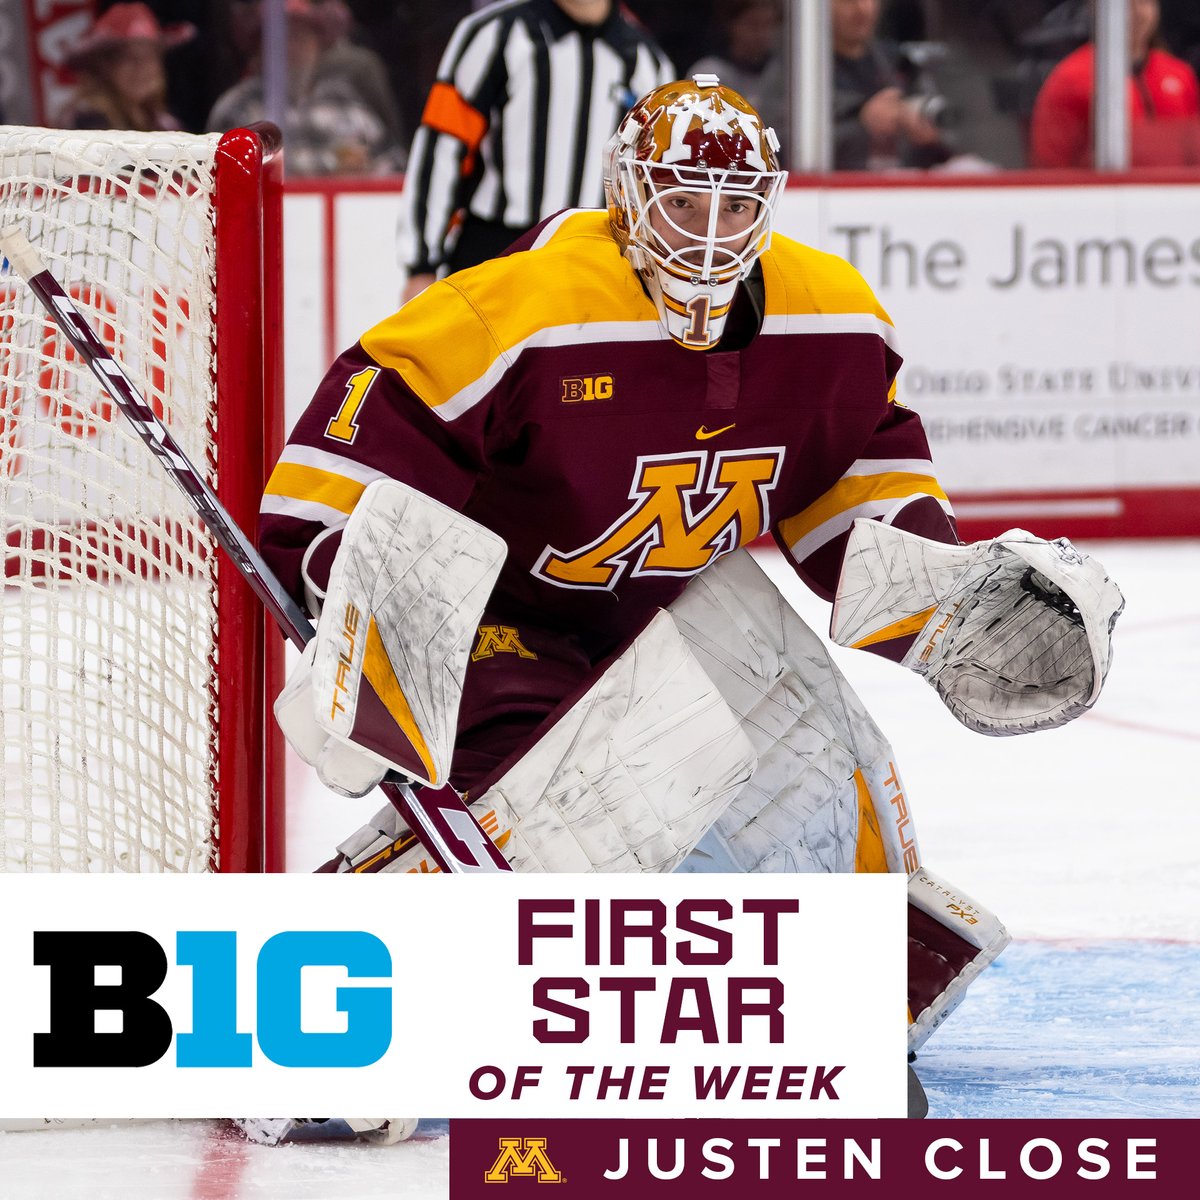 After stopping 62-of-64 shots in the #BorderBattle, Justen Close has been named @B1GHockey's first star of the week! ⭐️

📰: z.umn.edu/99yx